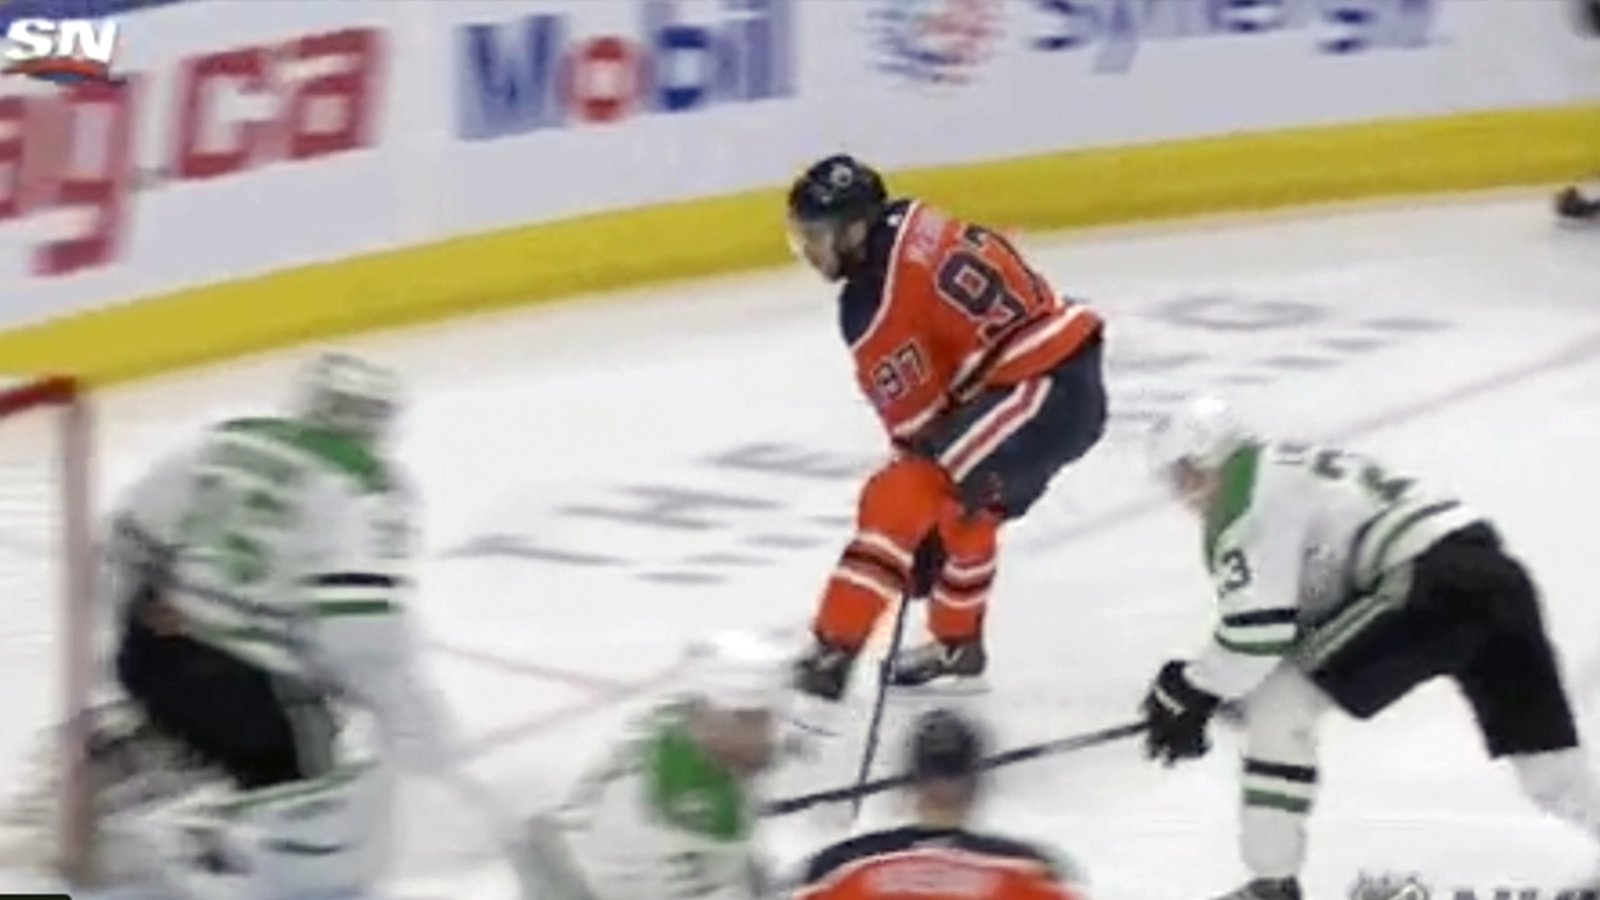 McDavid goes between the legs for a highlight reel beauty